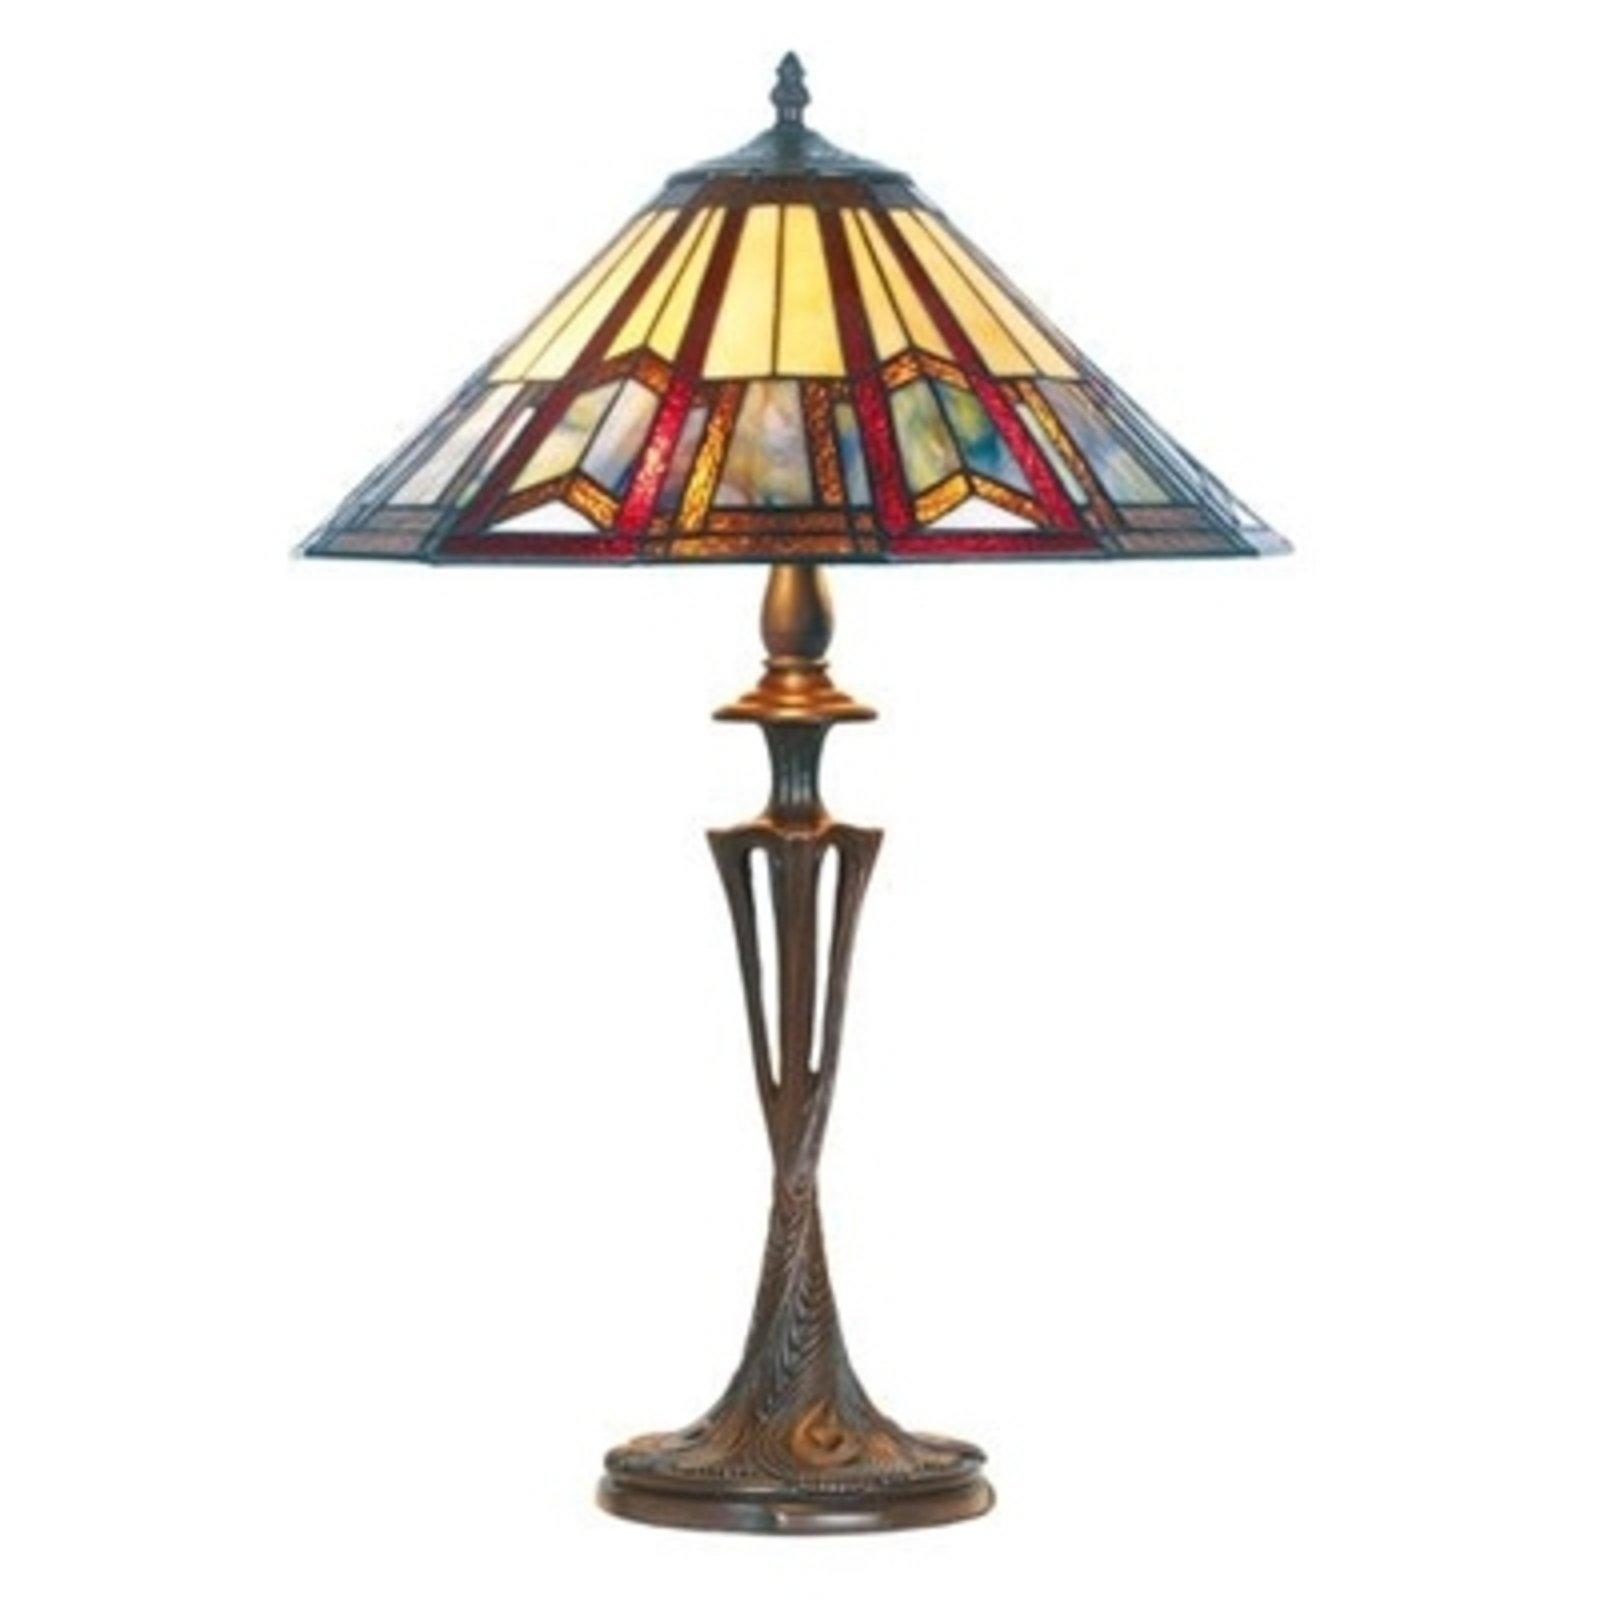 Lillie table lamp in Tiffany style